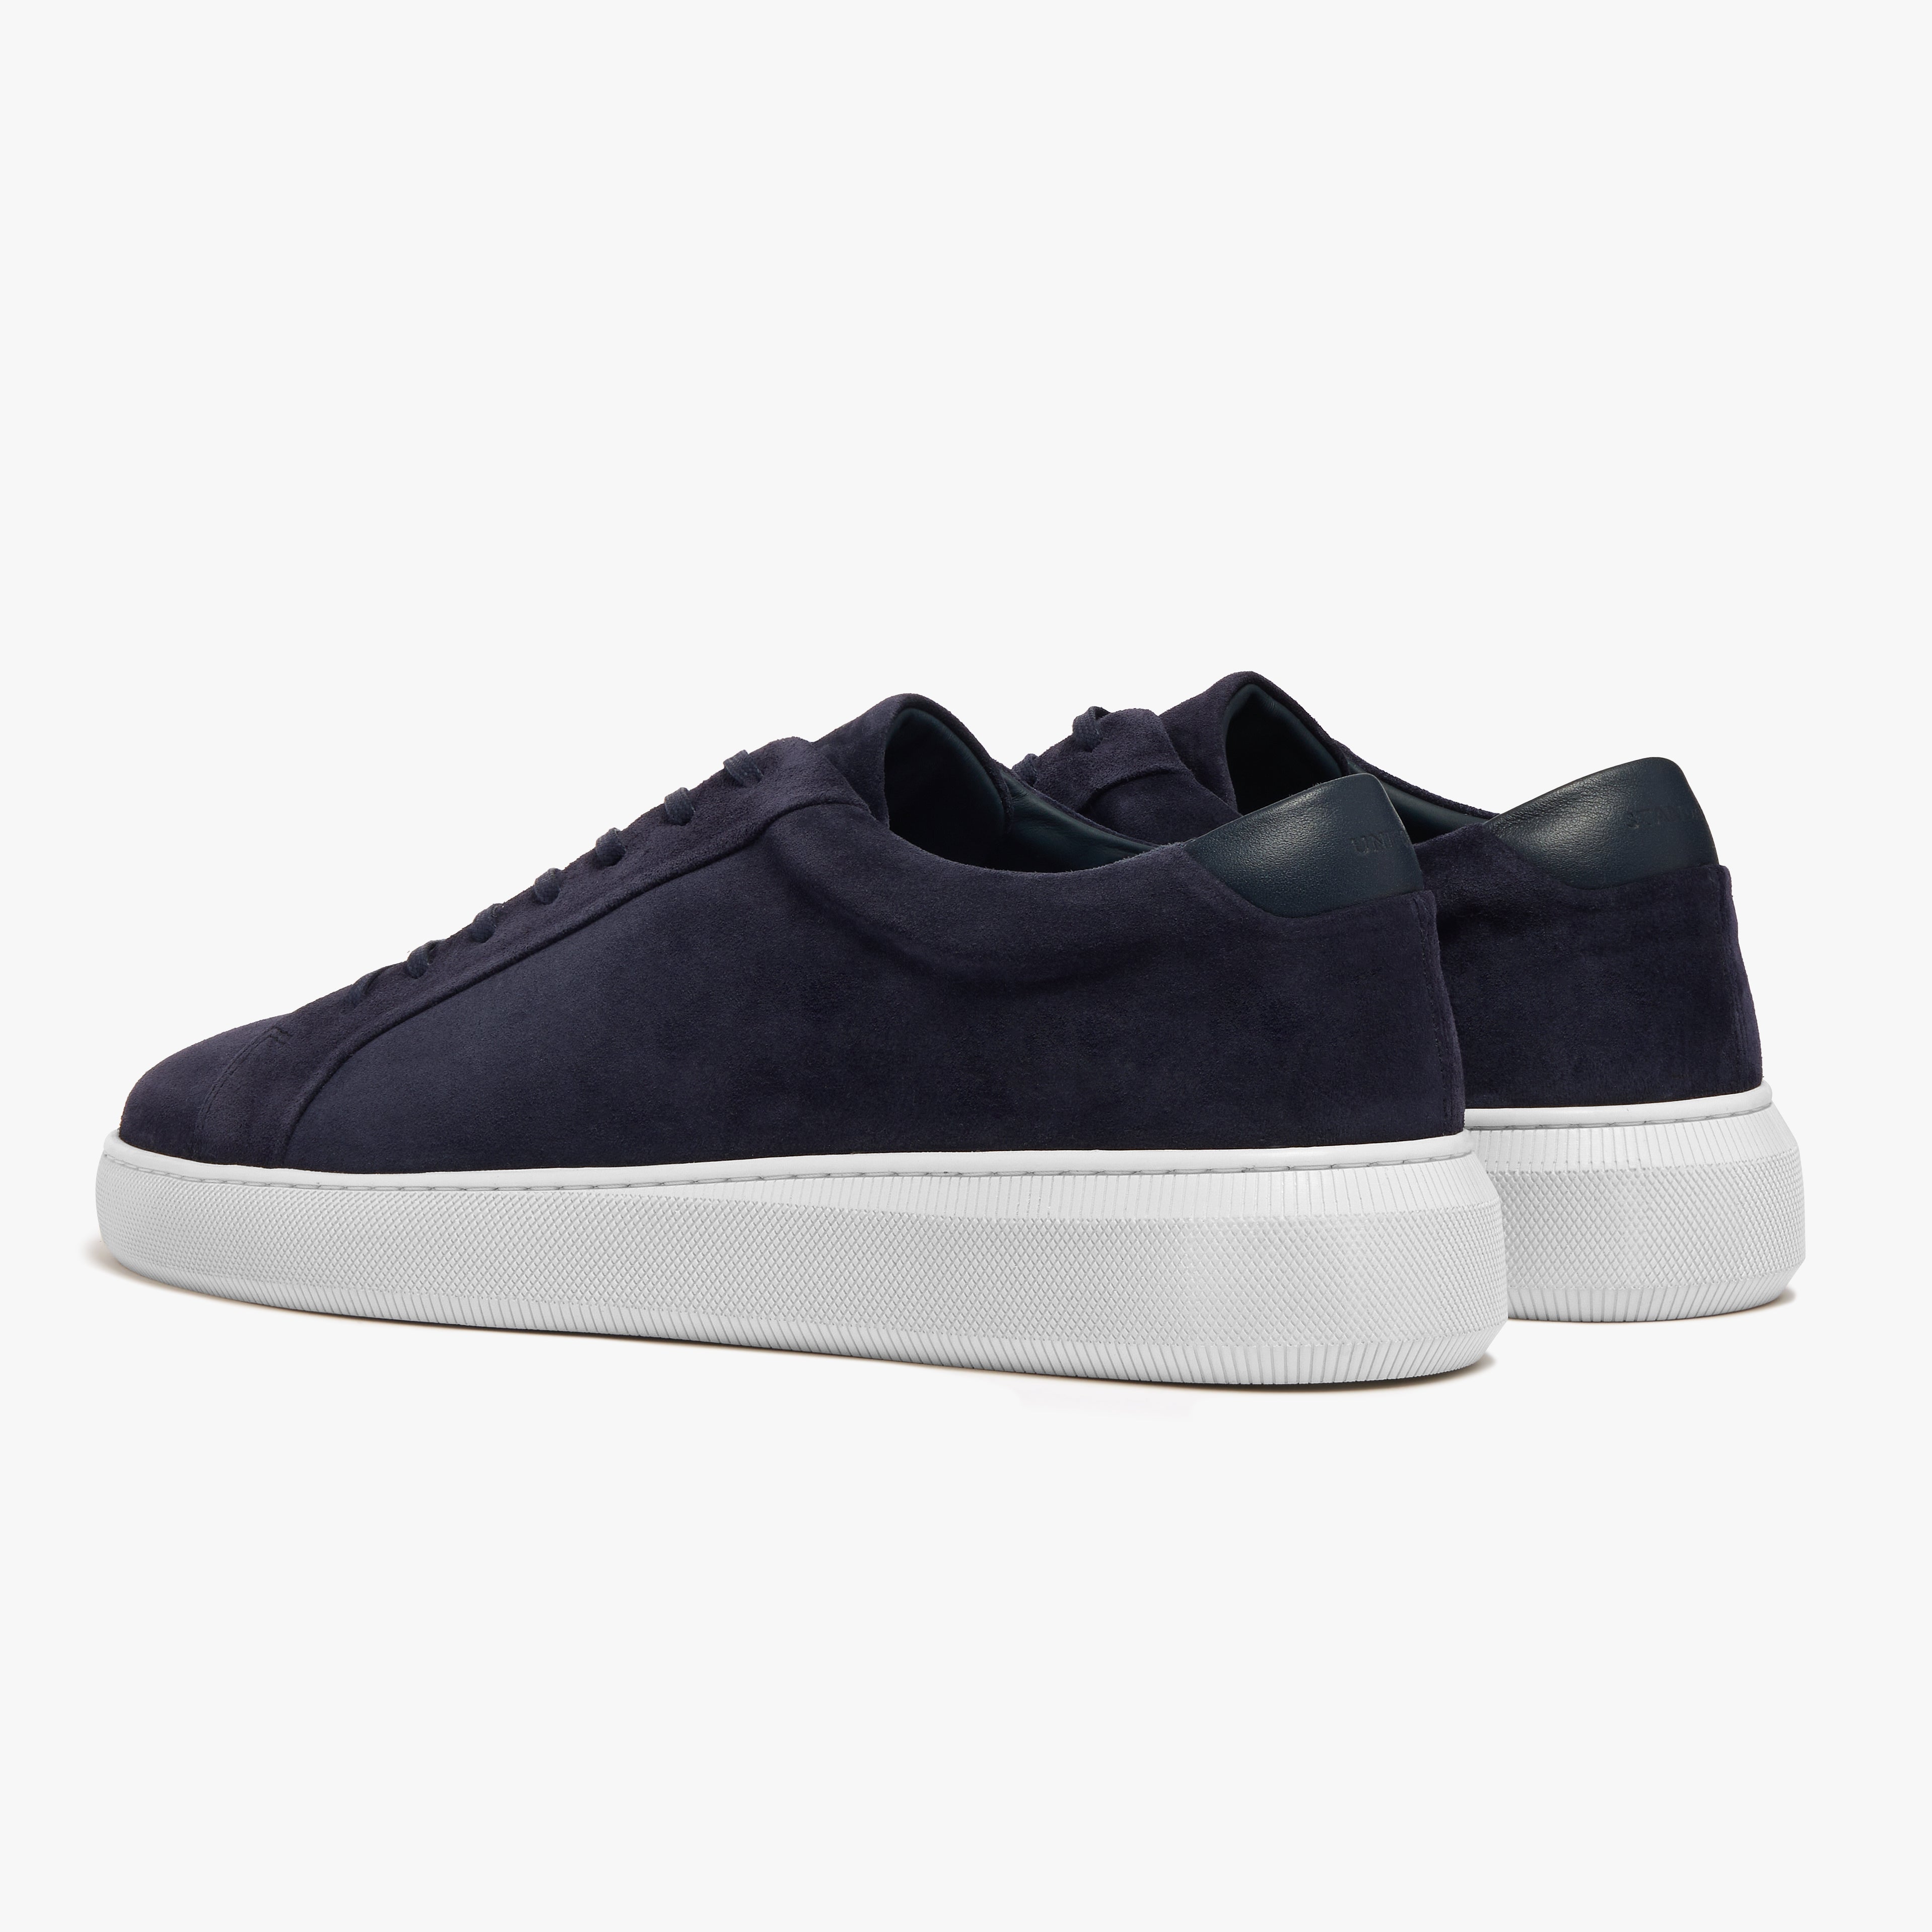 Series 8 Double Navy Suede Mens